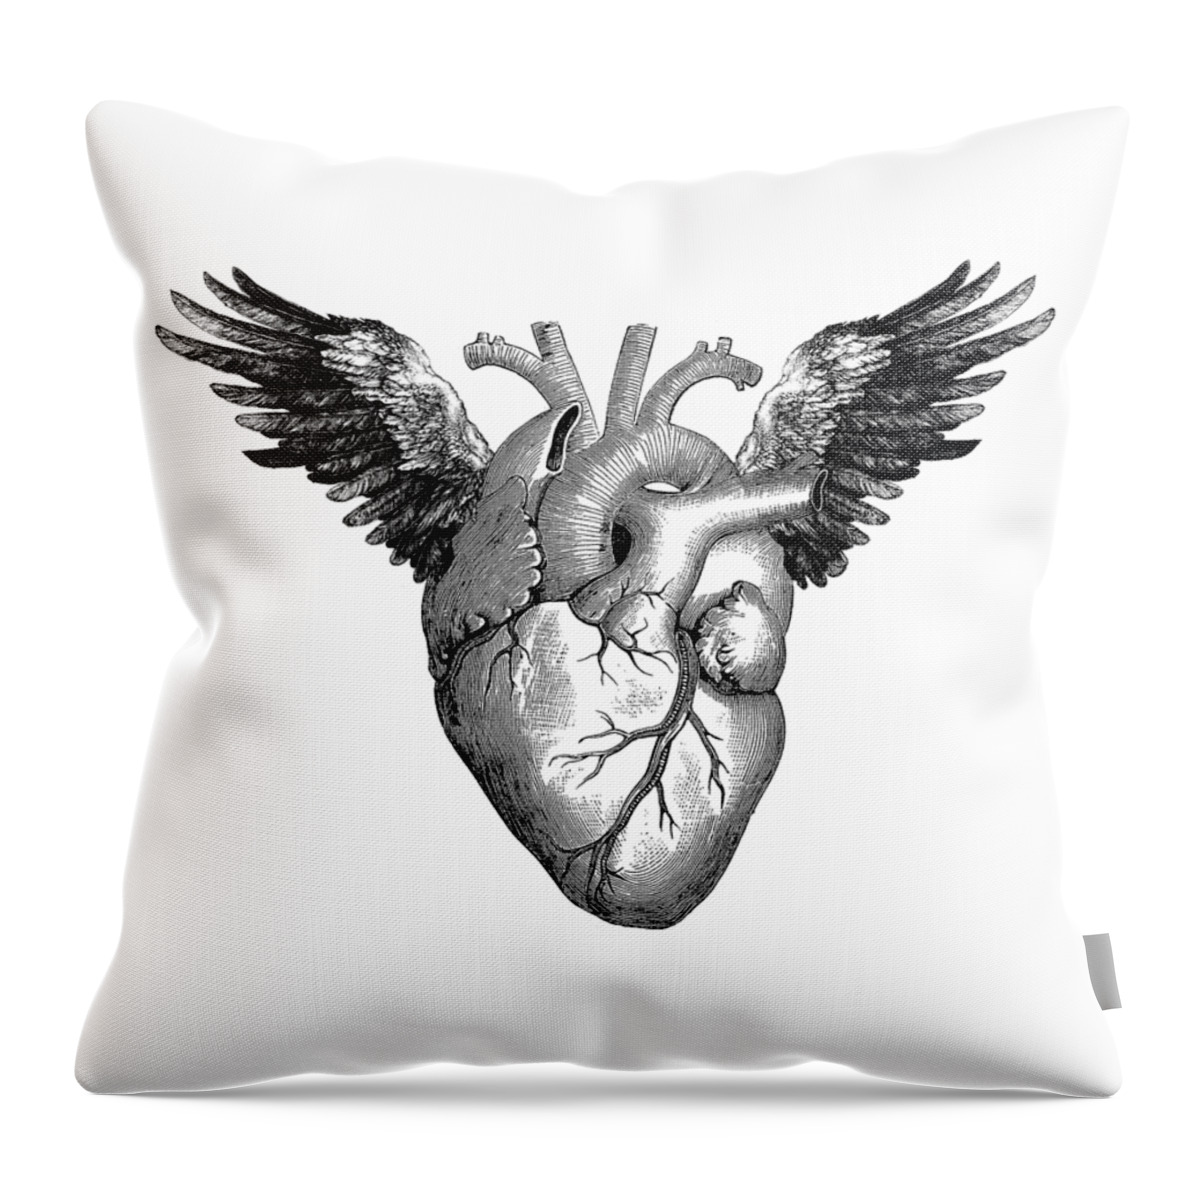 Heart Throw Pillow featuring the digital art Winged heart by Madame Memento